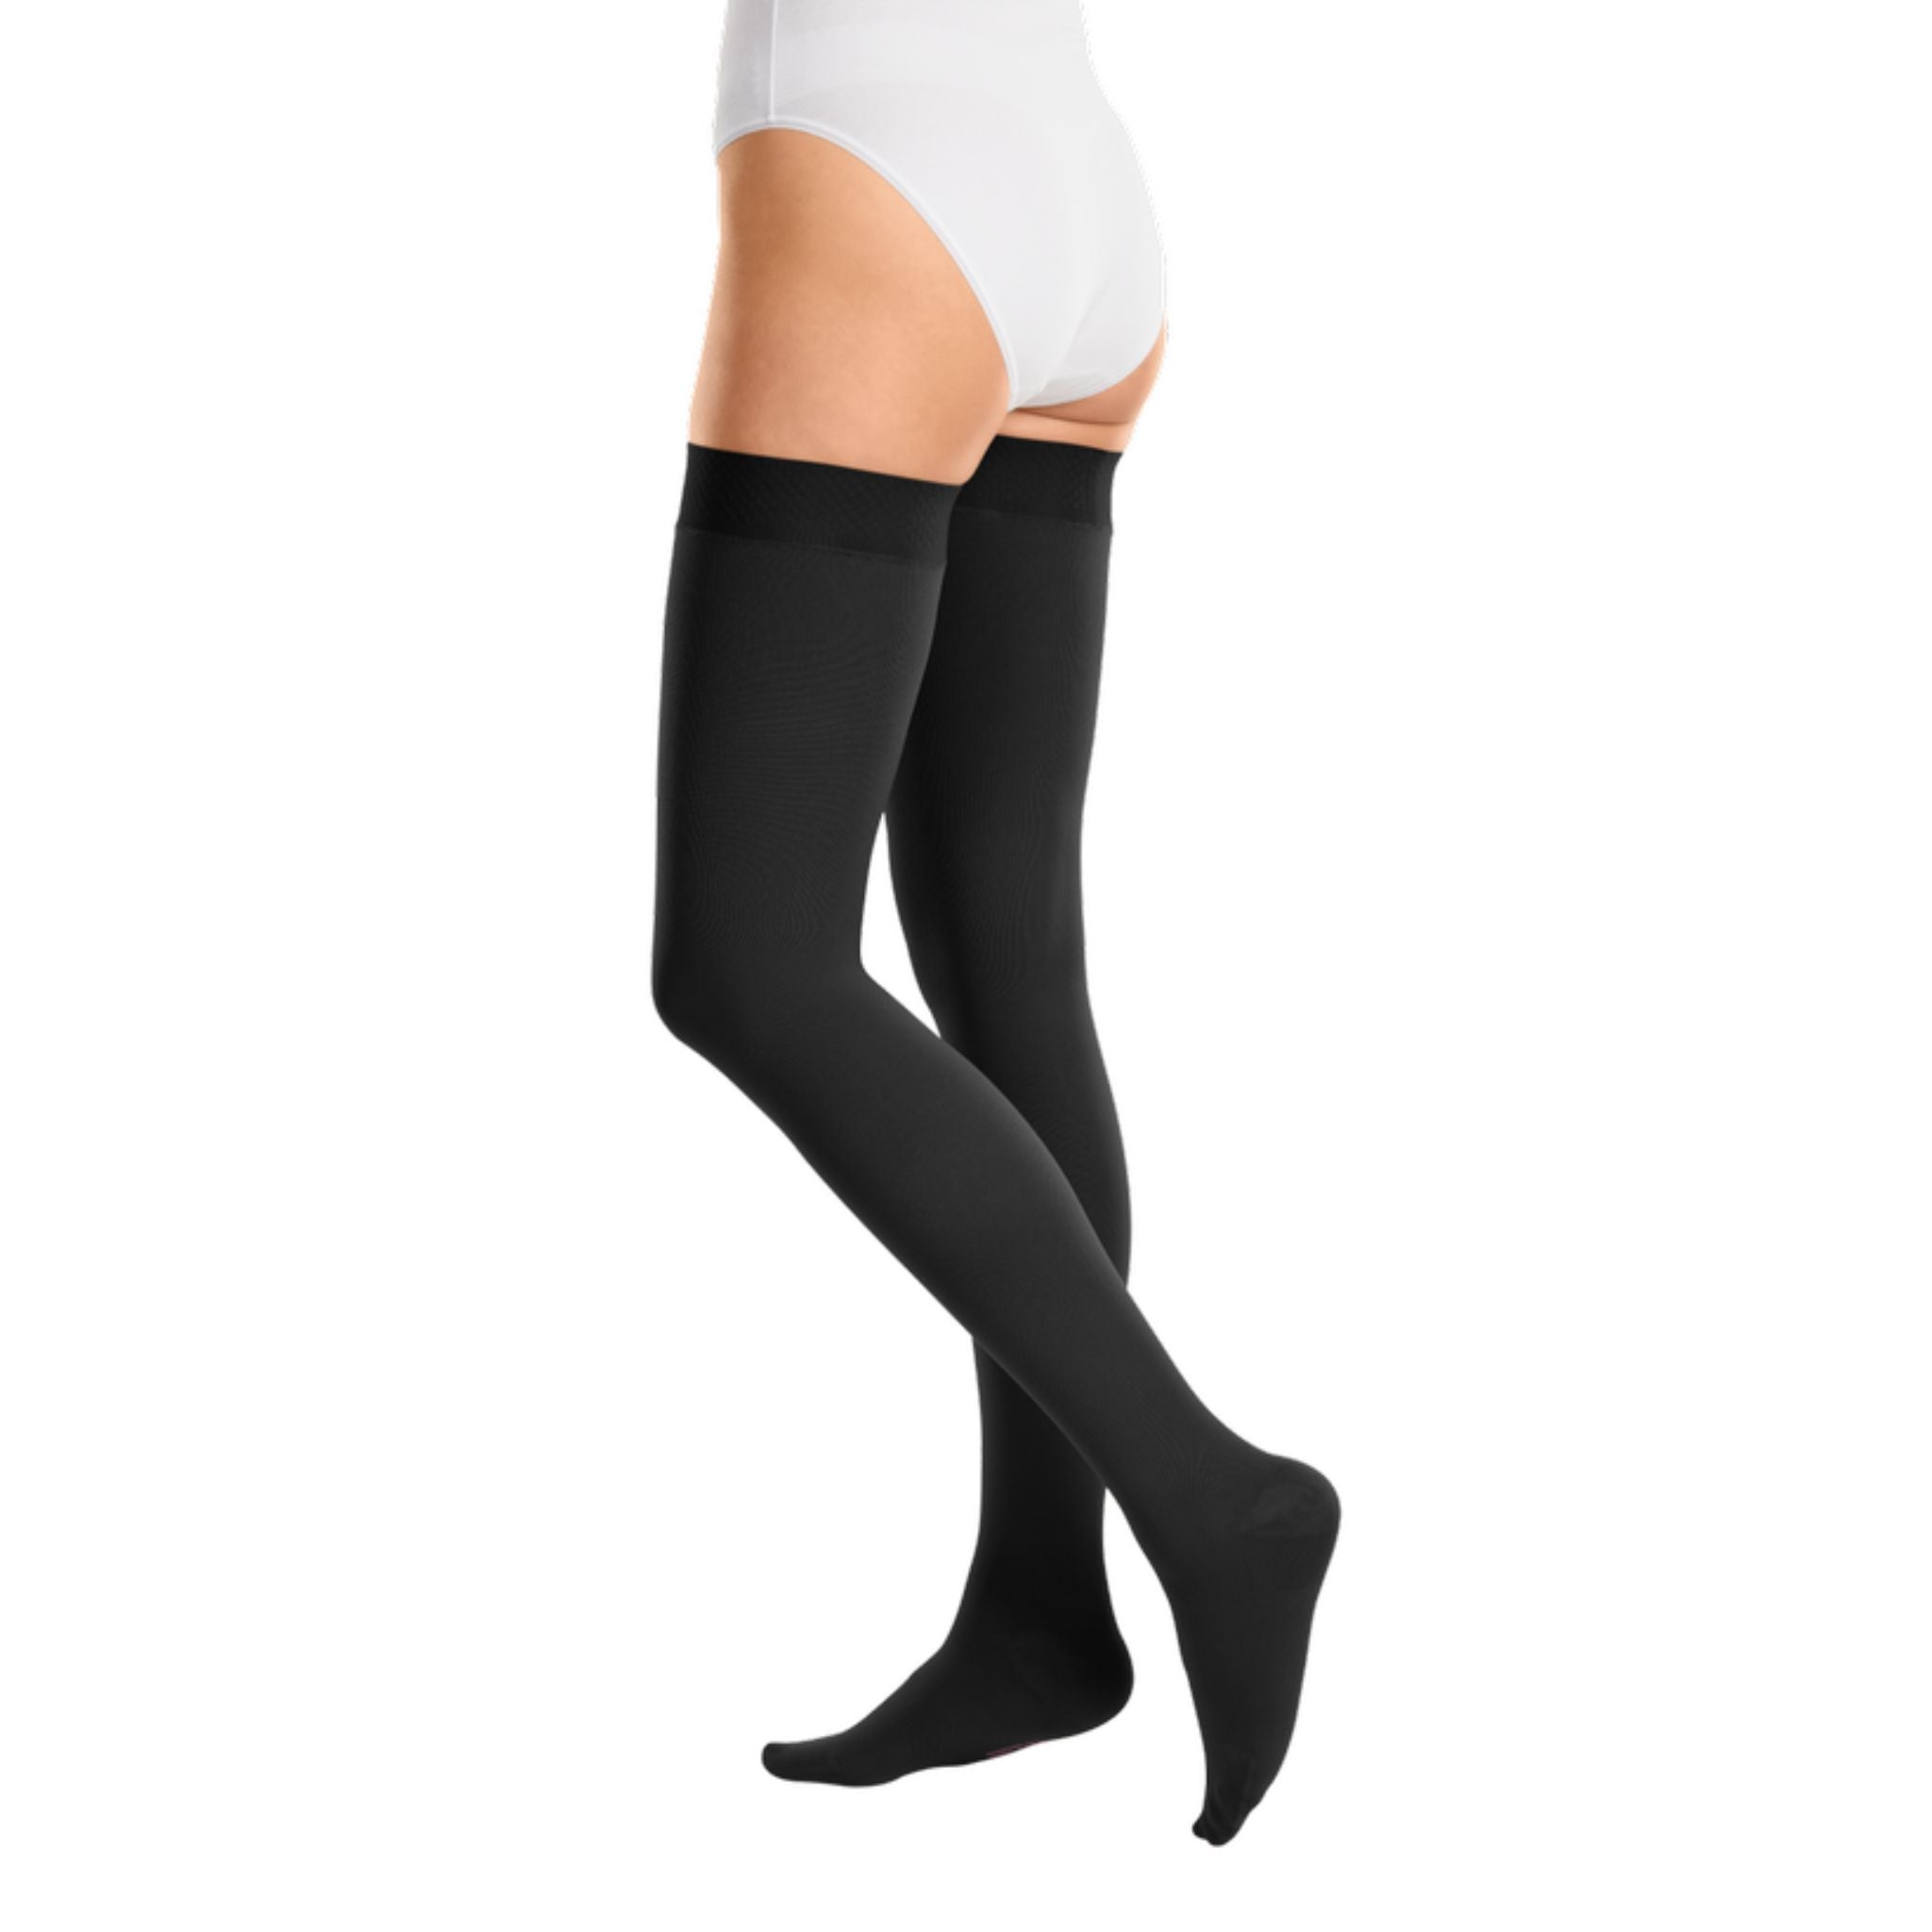 Compression Stockings | Thigh High | Sensitive Topband Wide | Open Toe | Black | mediven cotton